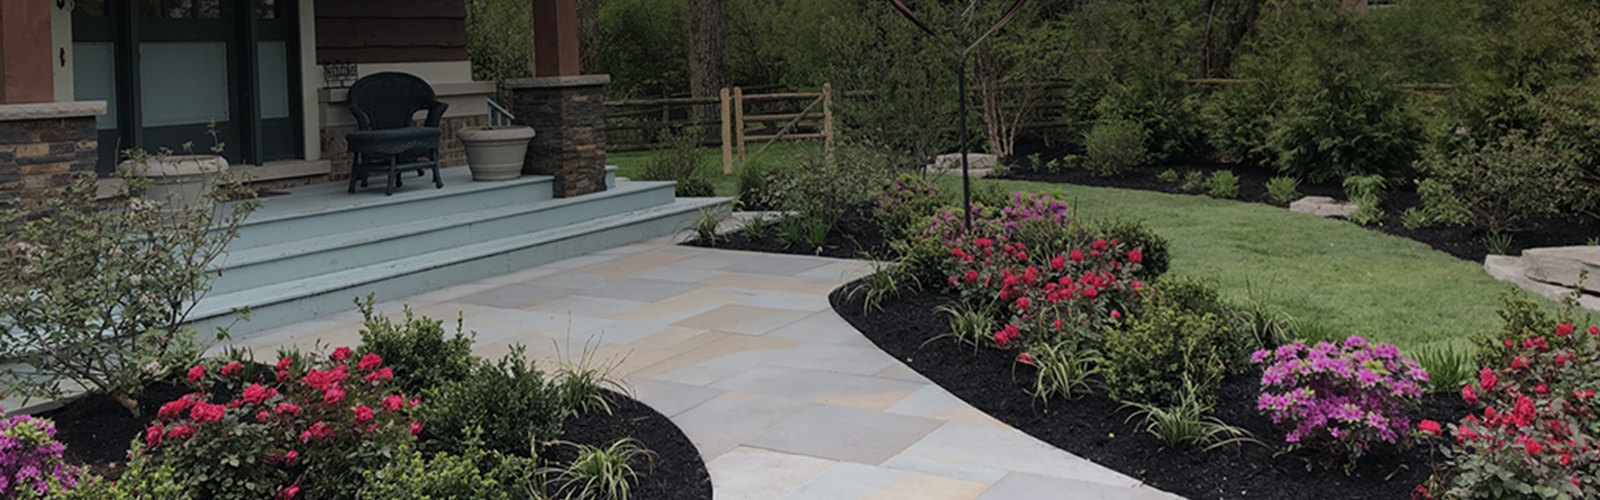 Blog by New Leaf Landscaping, Inc.